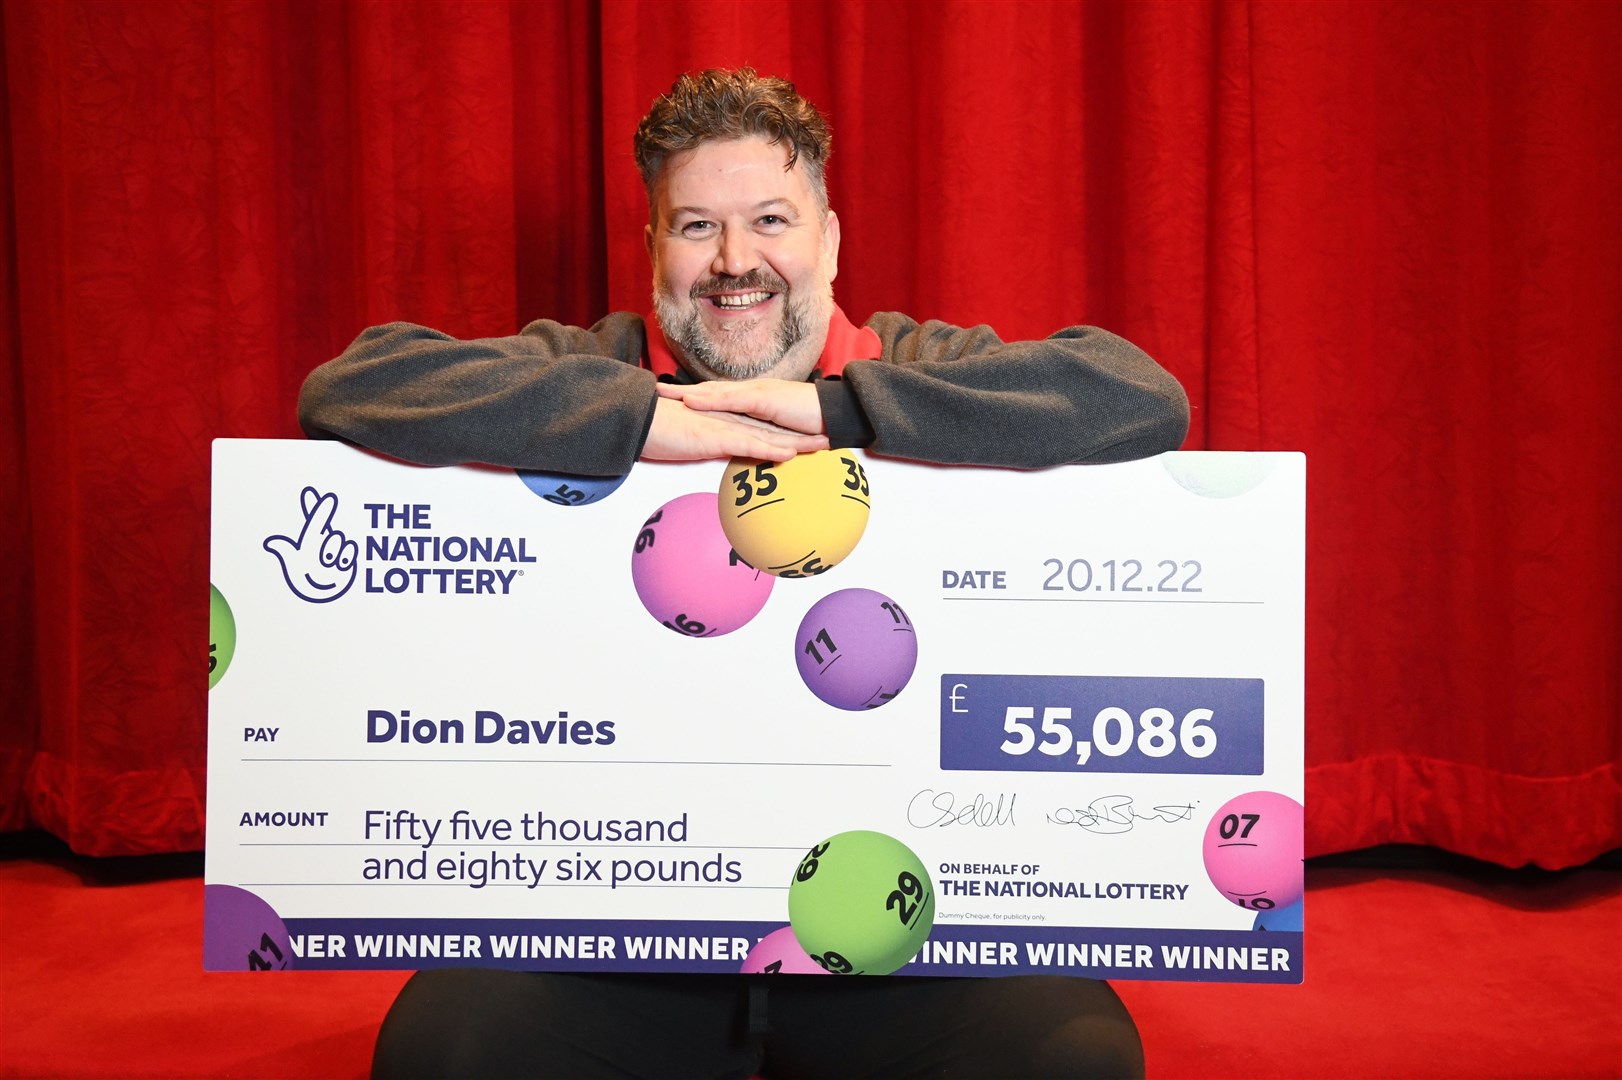 Dion Davies found the EuroMillions ticket tucked inside a sun visor while his car was being cleaned, six weeks after the draw (National Lottery/PA)